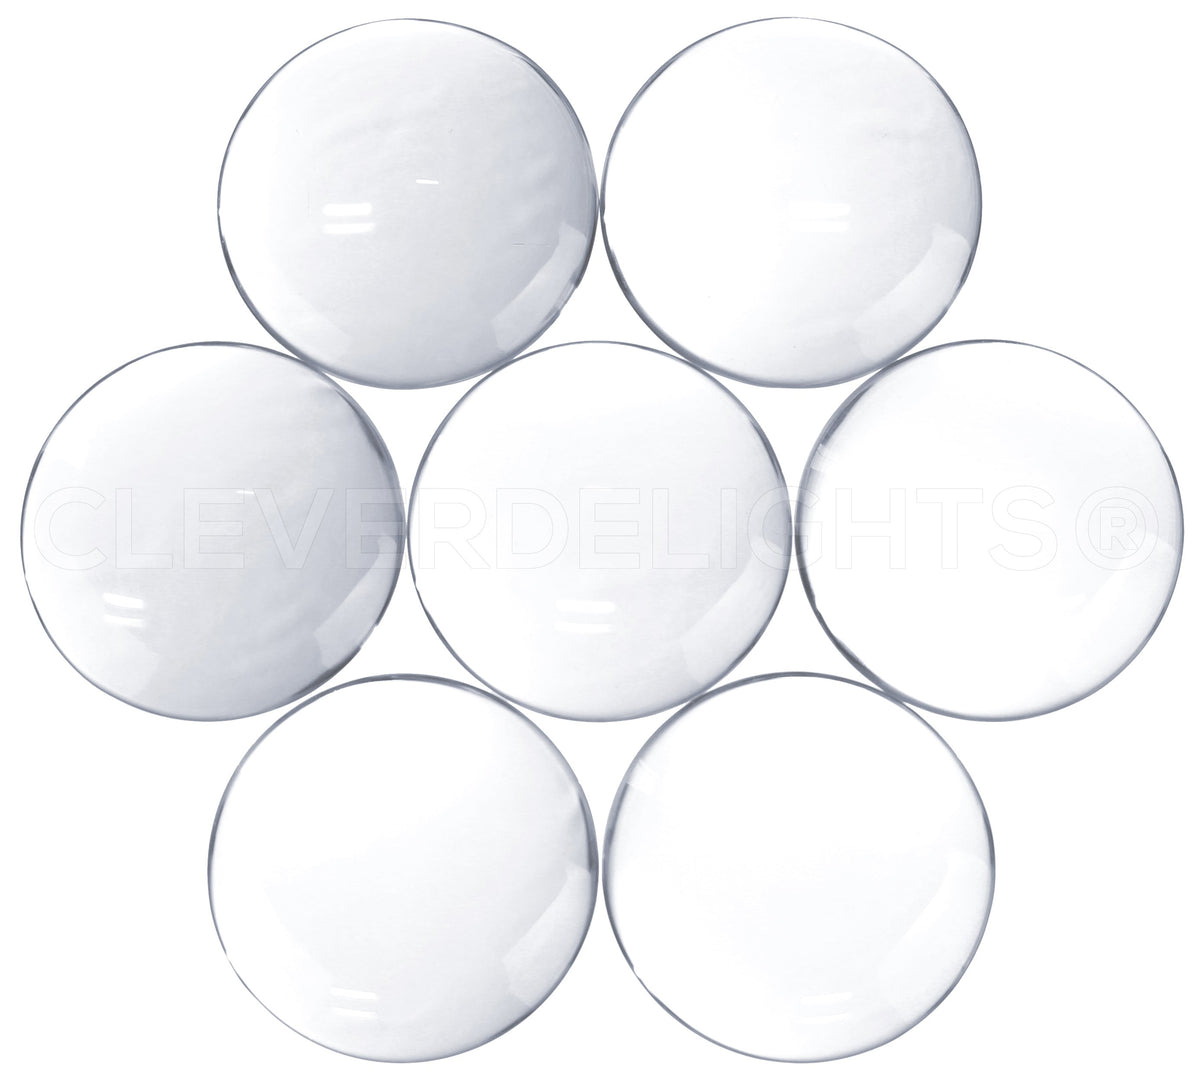 CleverDelights 14mm (9/16) Round Glass Cabochons - 100 Pack